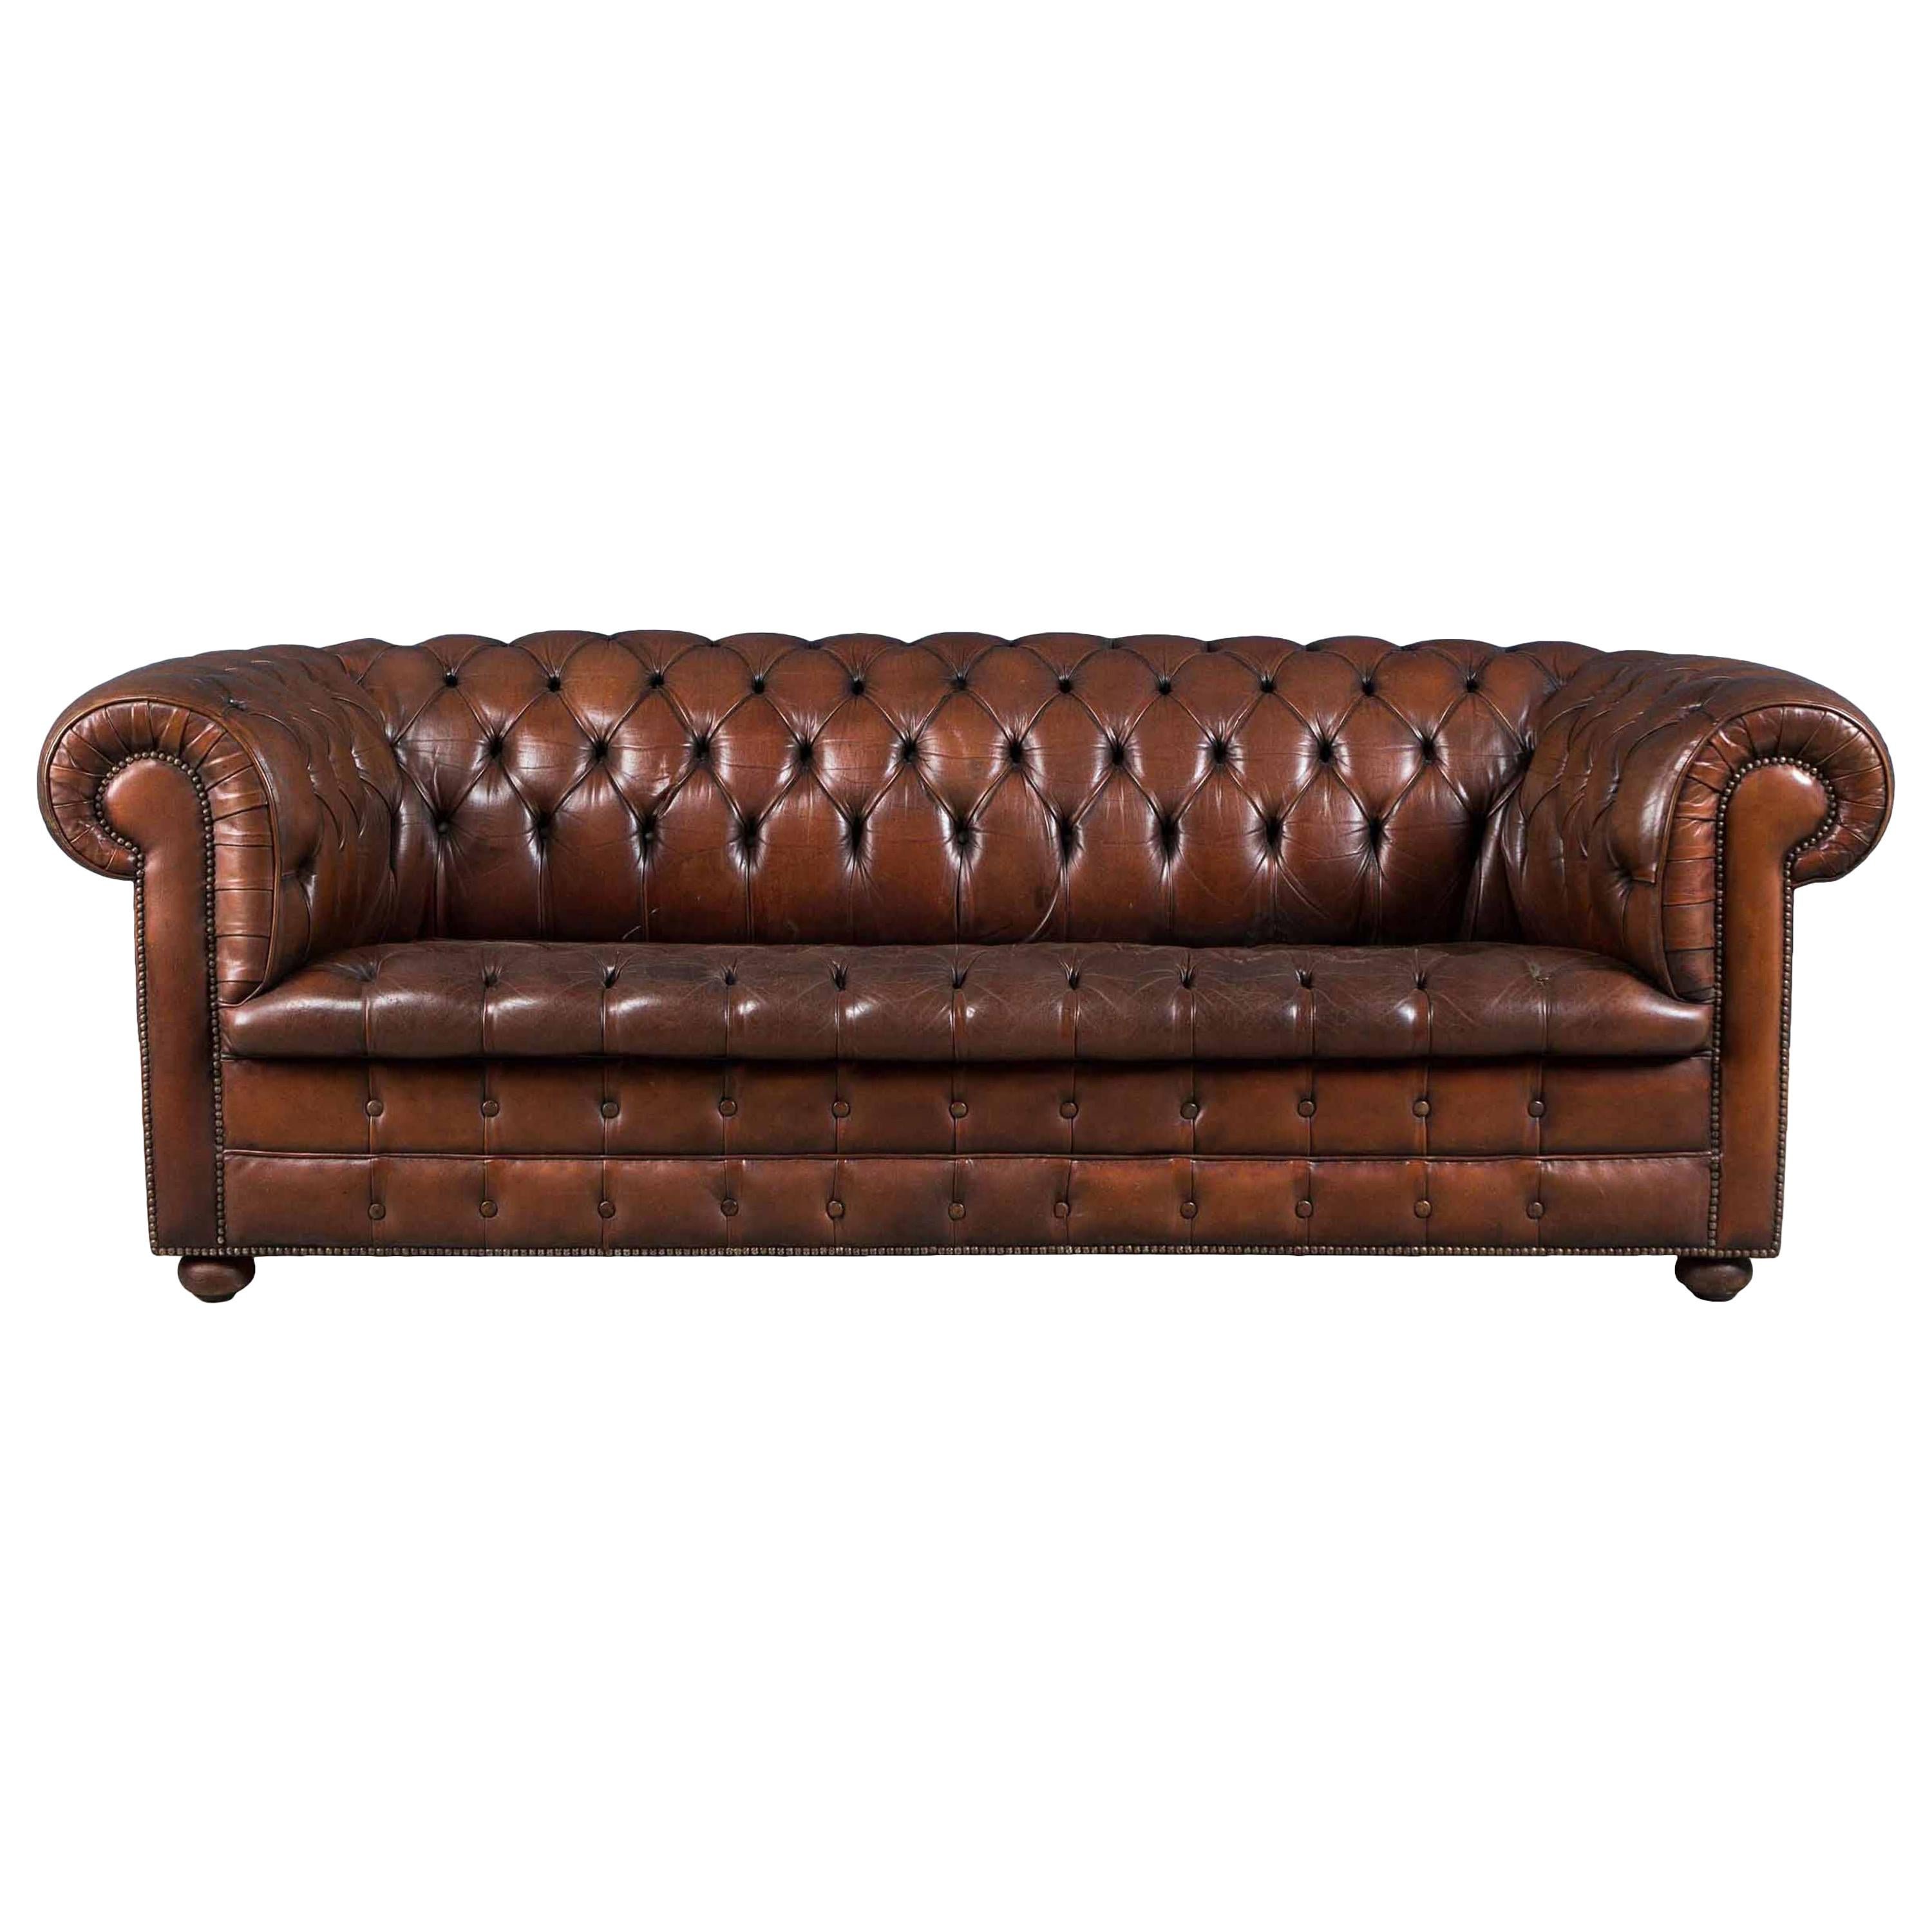 Superb Chesterfield Leather Sofa with Button Down Seat